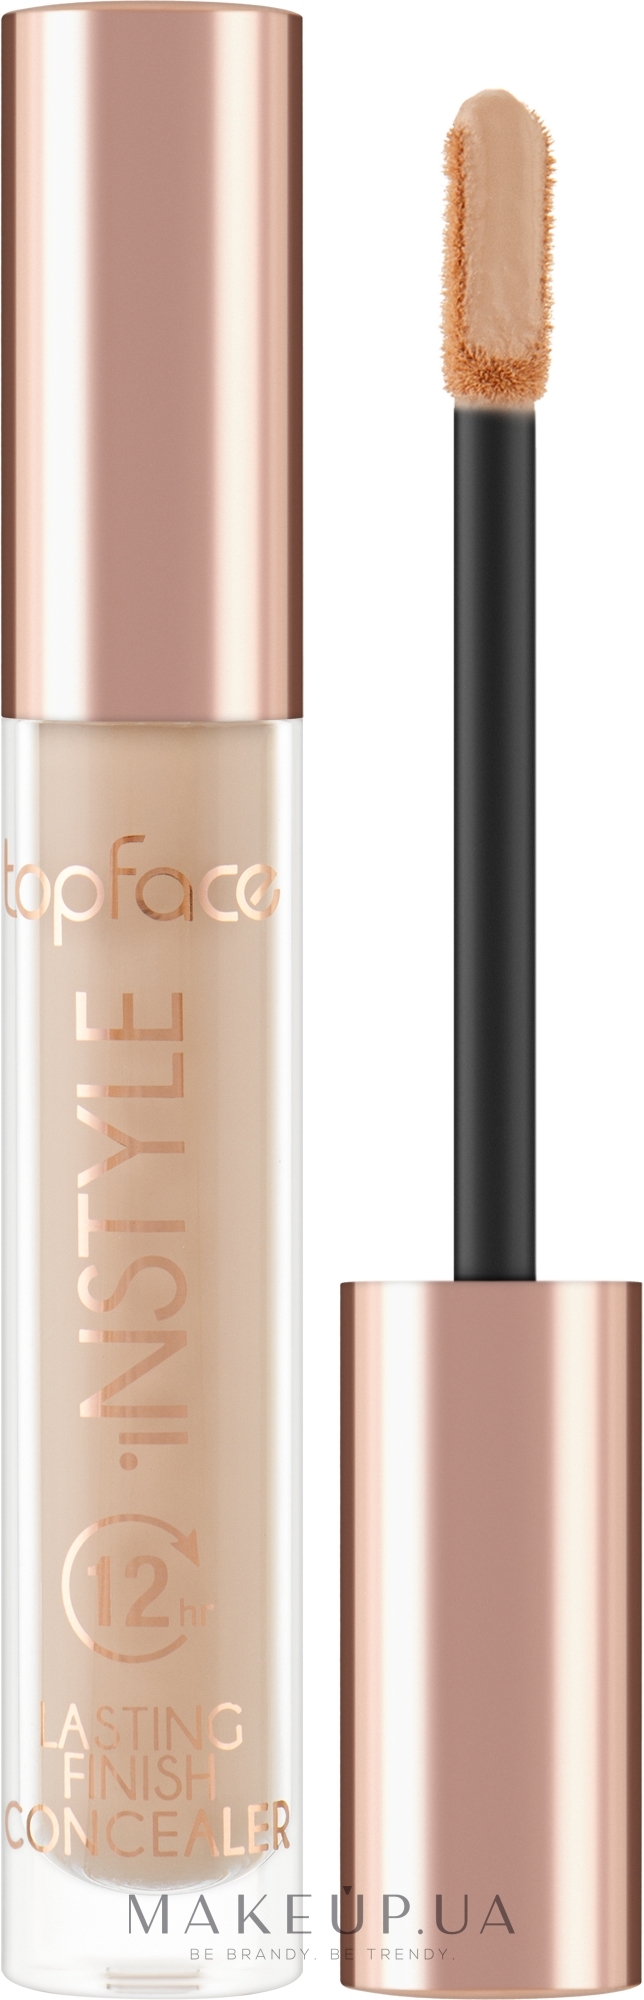 TopFace Instyle Lasting Finish Concealer